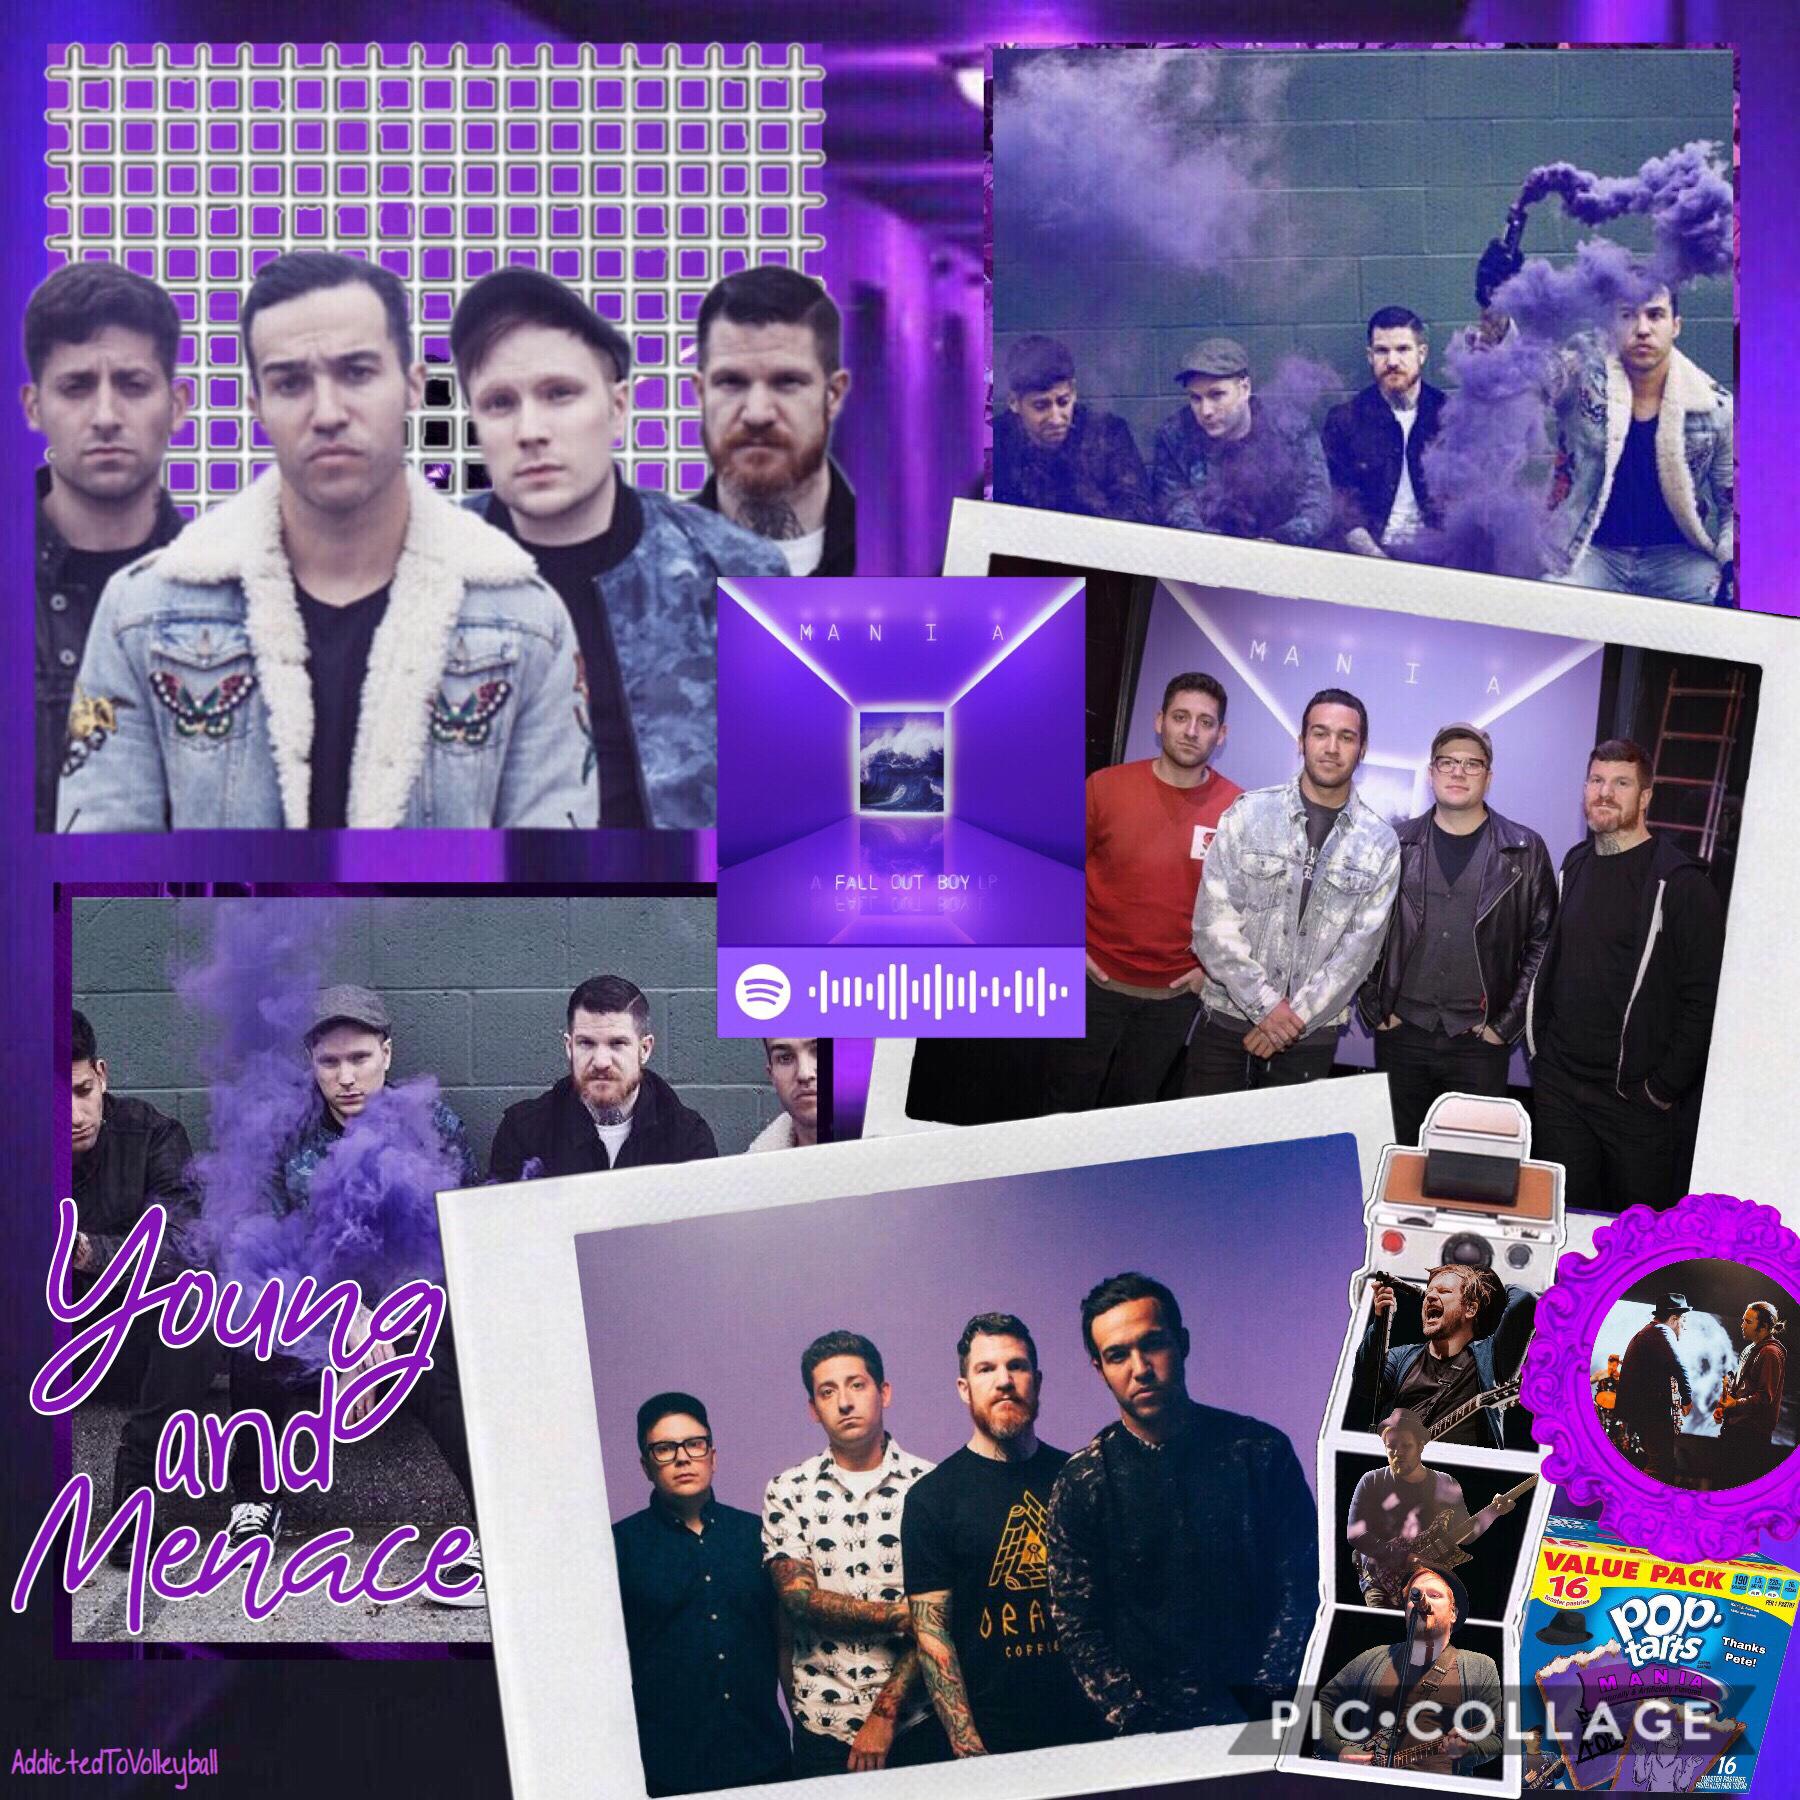 7-6-19 - M A N I A - tap!
I’m so proud of this sksks 💜
Mania is a freaking masterpiece 🤩
In this house we stan FOB 👏🏼🙌🏼
When I found the poptart png I was in LOVE 😂😂
QOTD: fave song on MANIA?
AOTD: bishops knife trick 💜💘